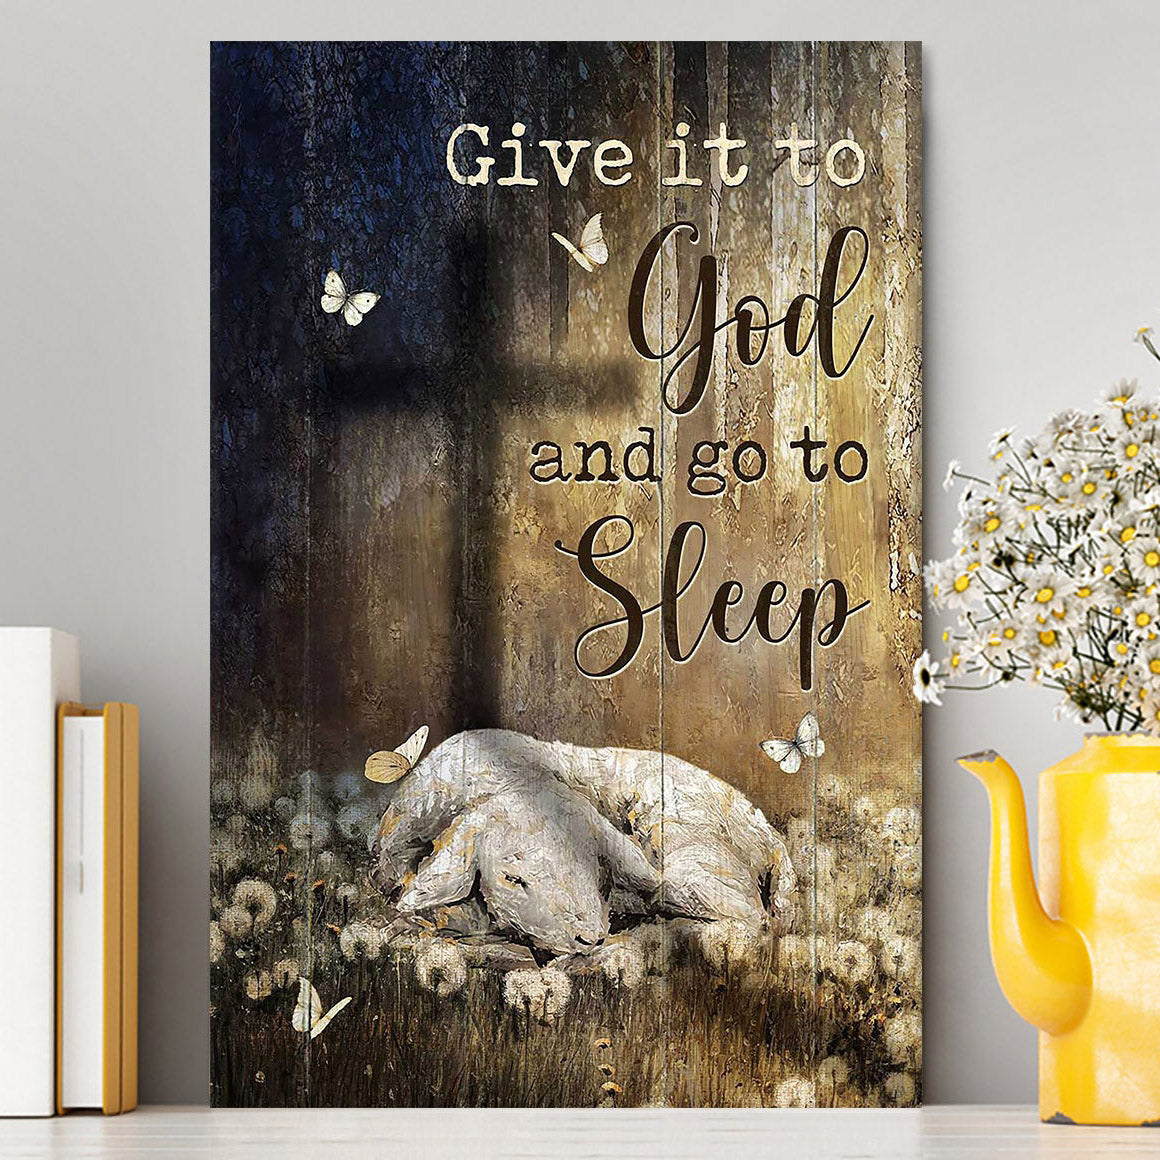 Lamb Of God Dandelion Field Give It To God And Go To Sleep Canvas Art - Christian Art - Bible Verse Wall Art - Religious Home Decor